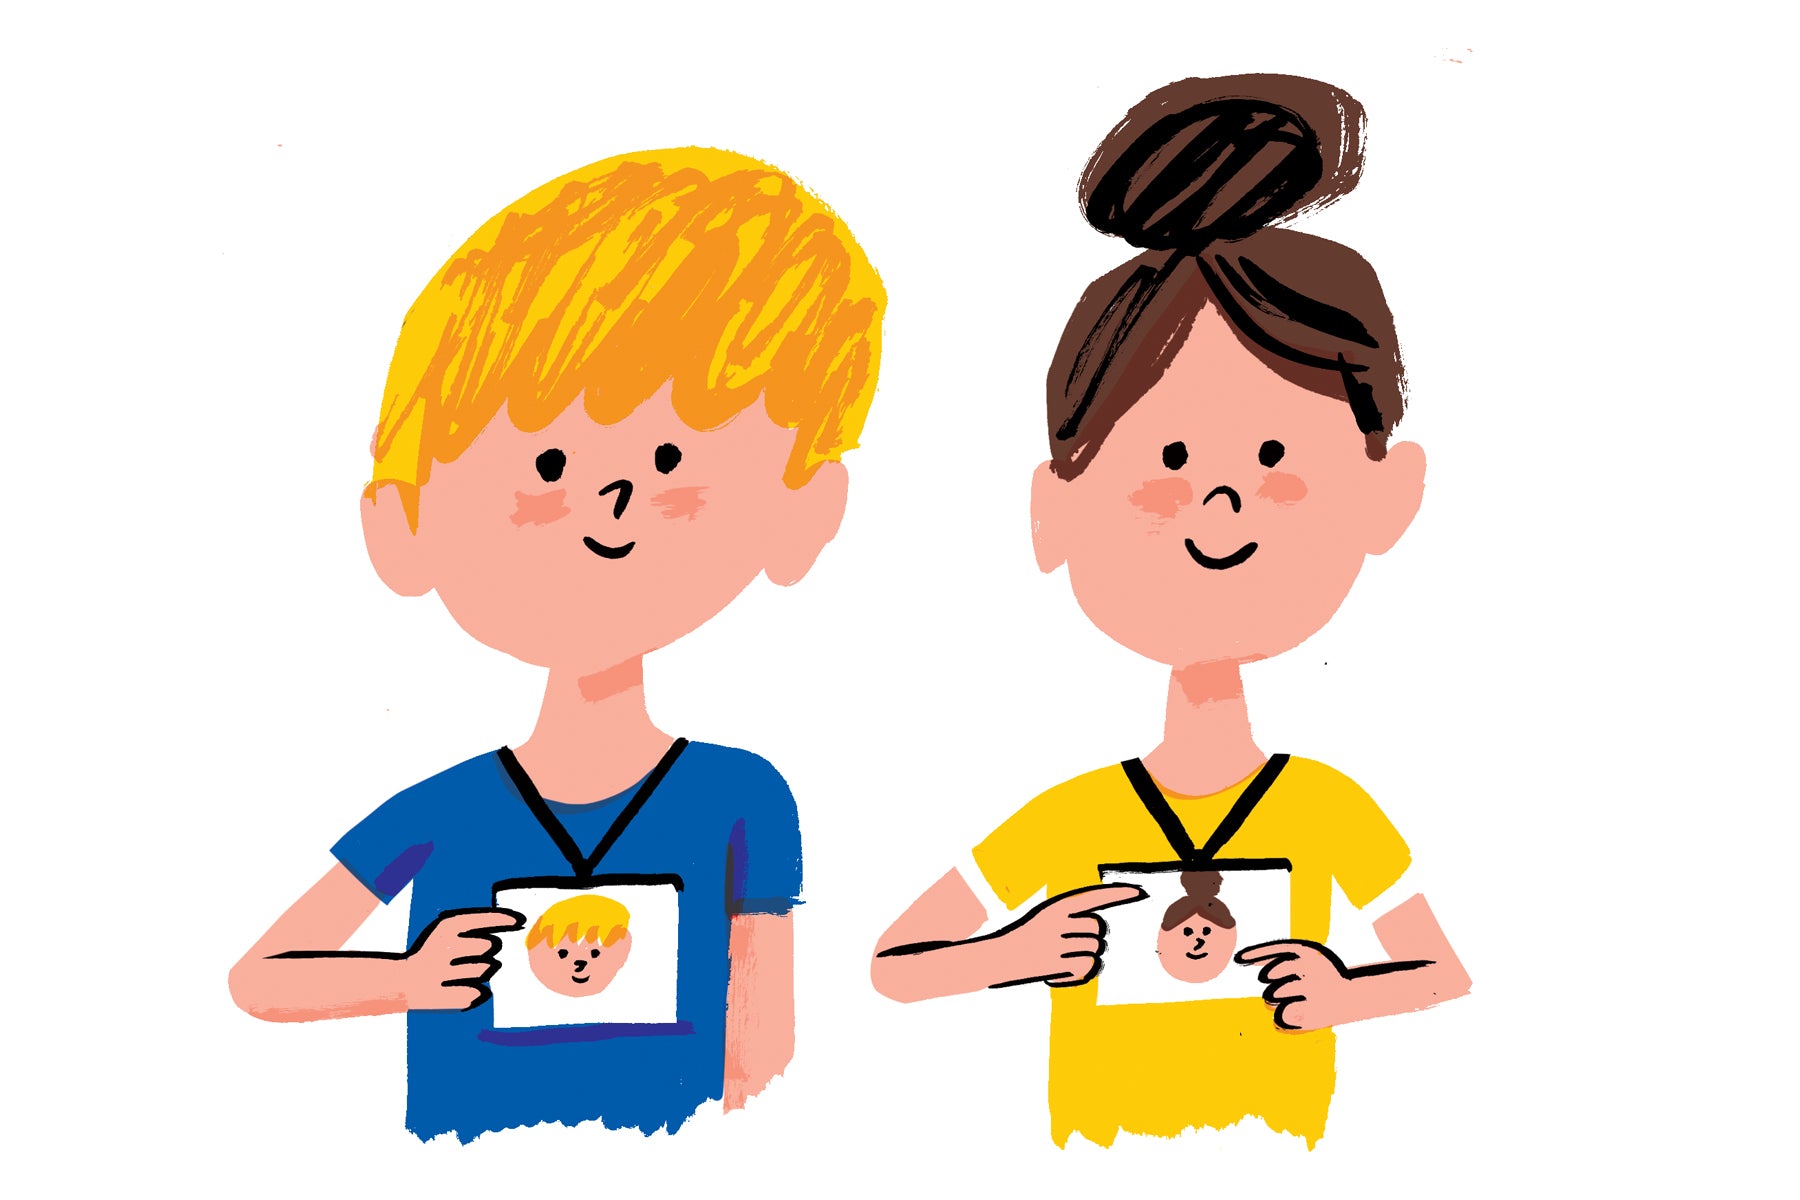 Illustration of two young children smiling, wearing lanyards with drawings of their own faces on them. 